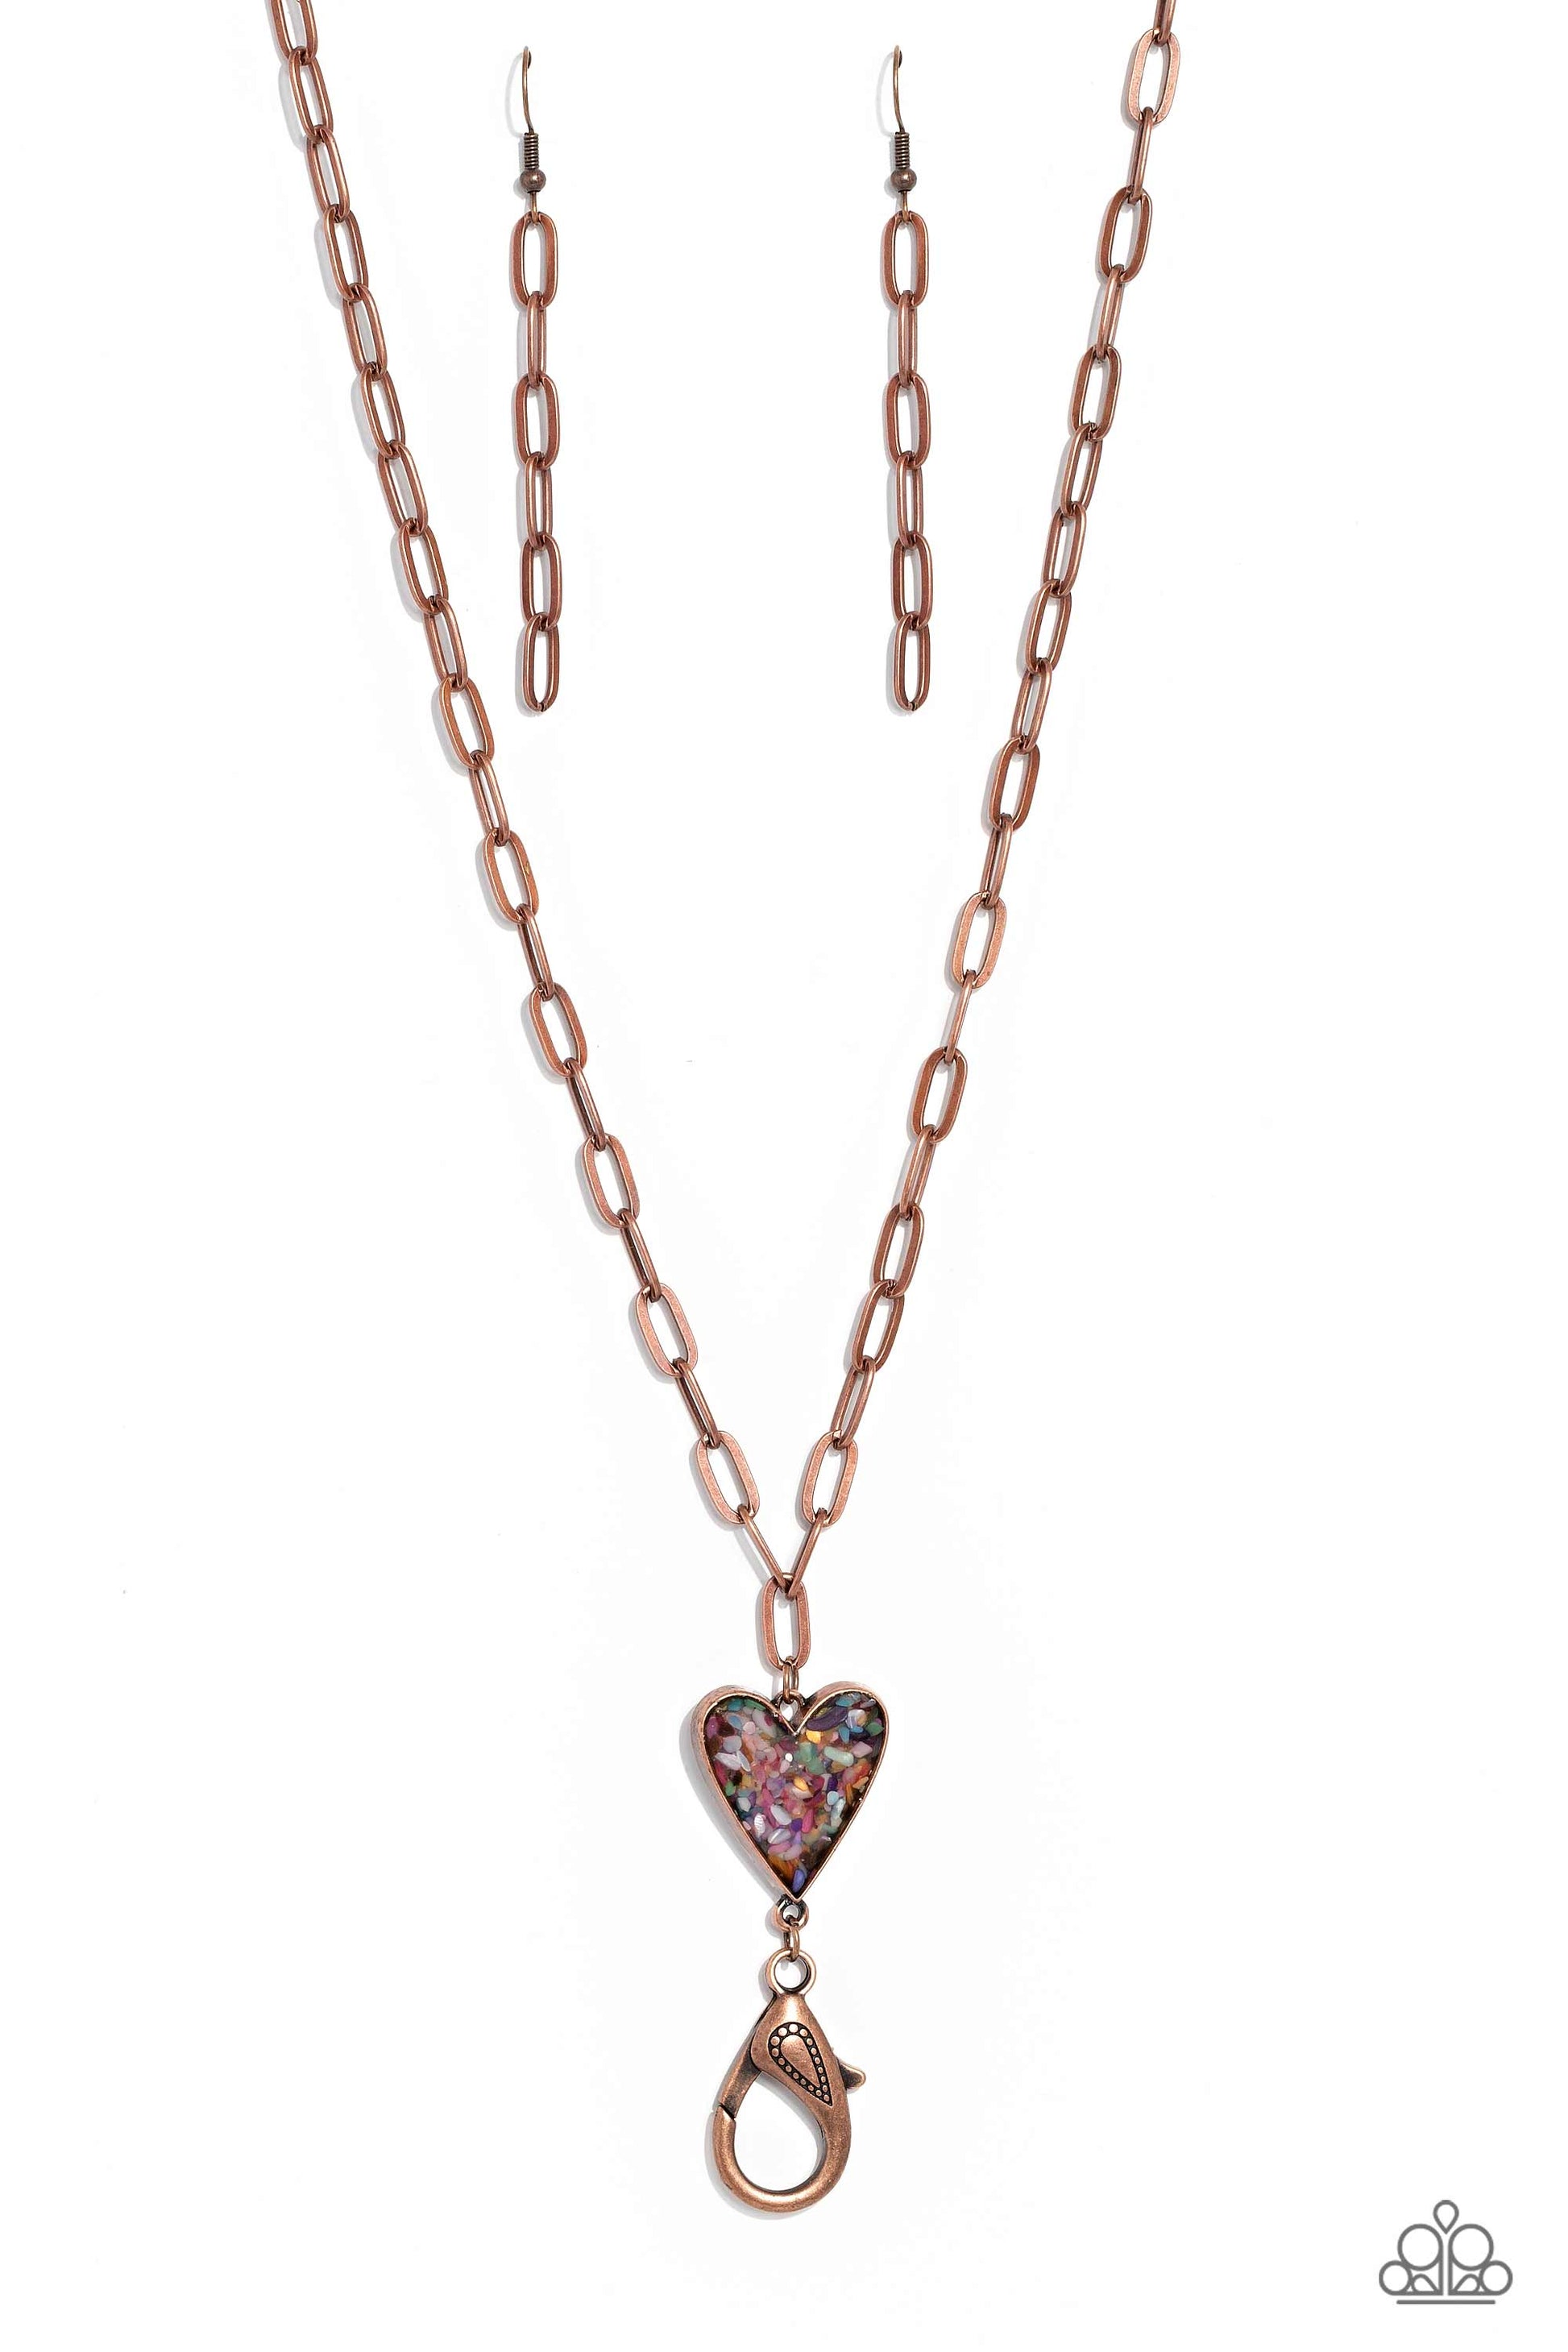 Kiss and SHELL - copper - Paparazzi LANYARD necklace